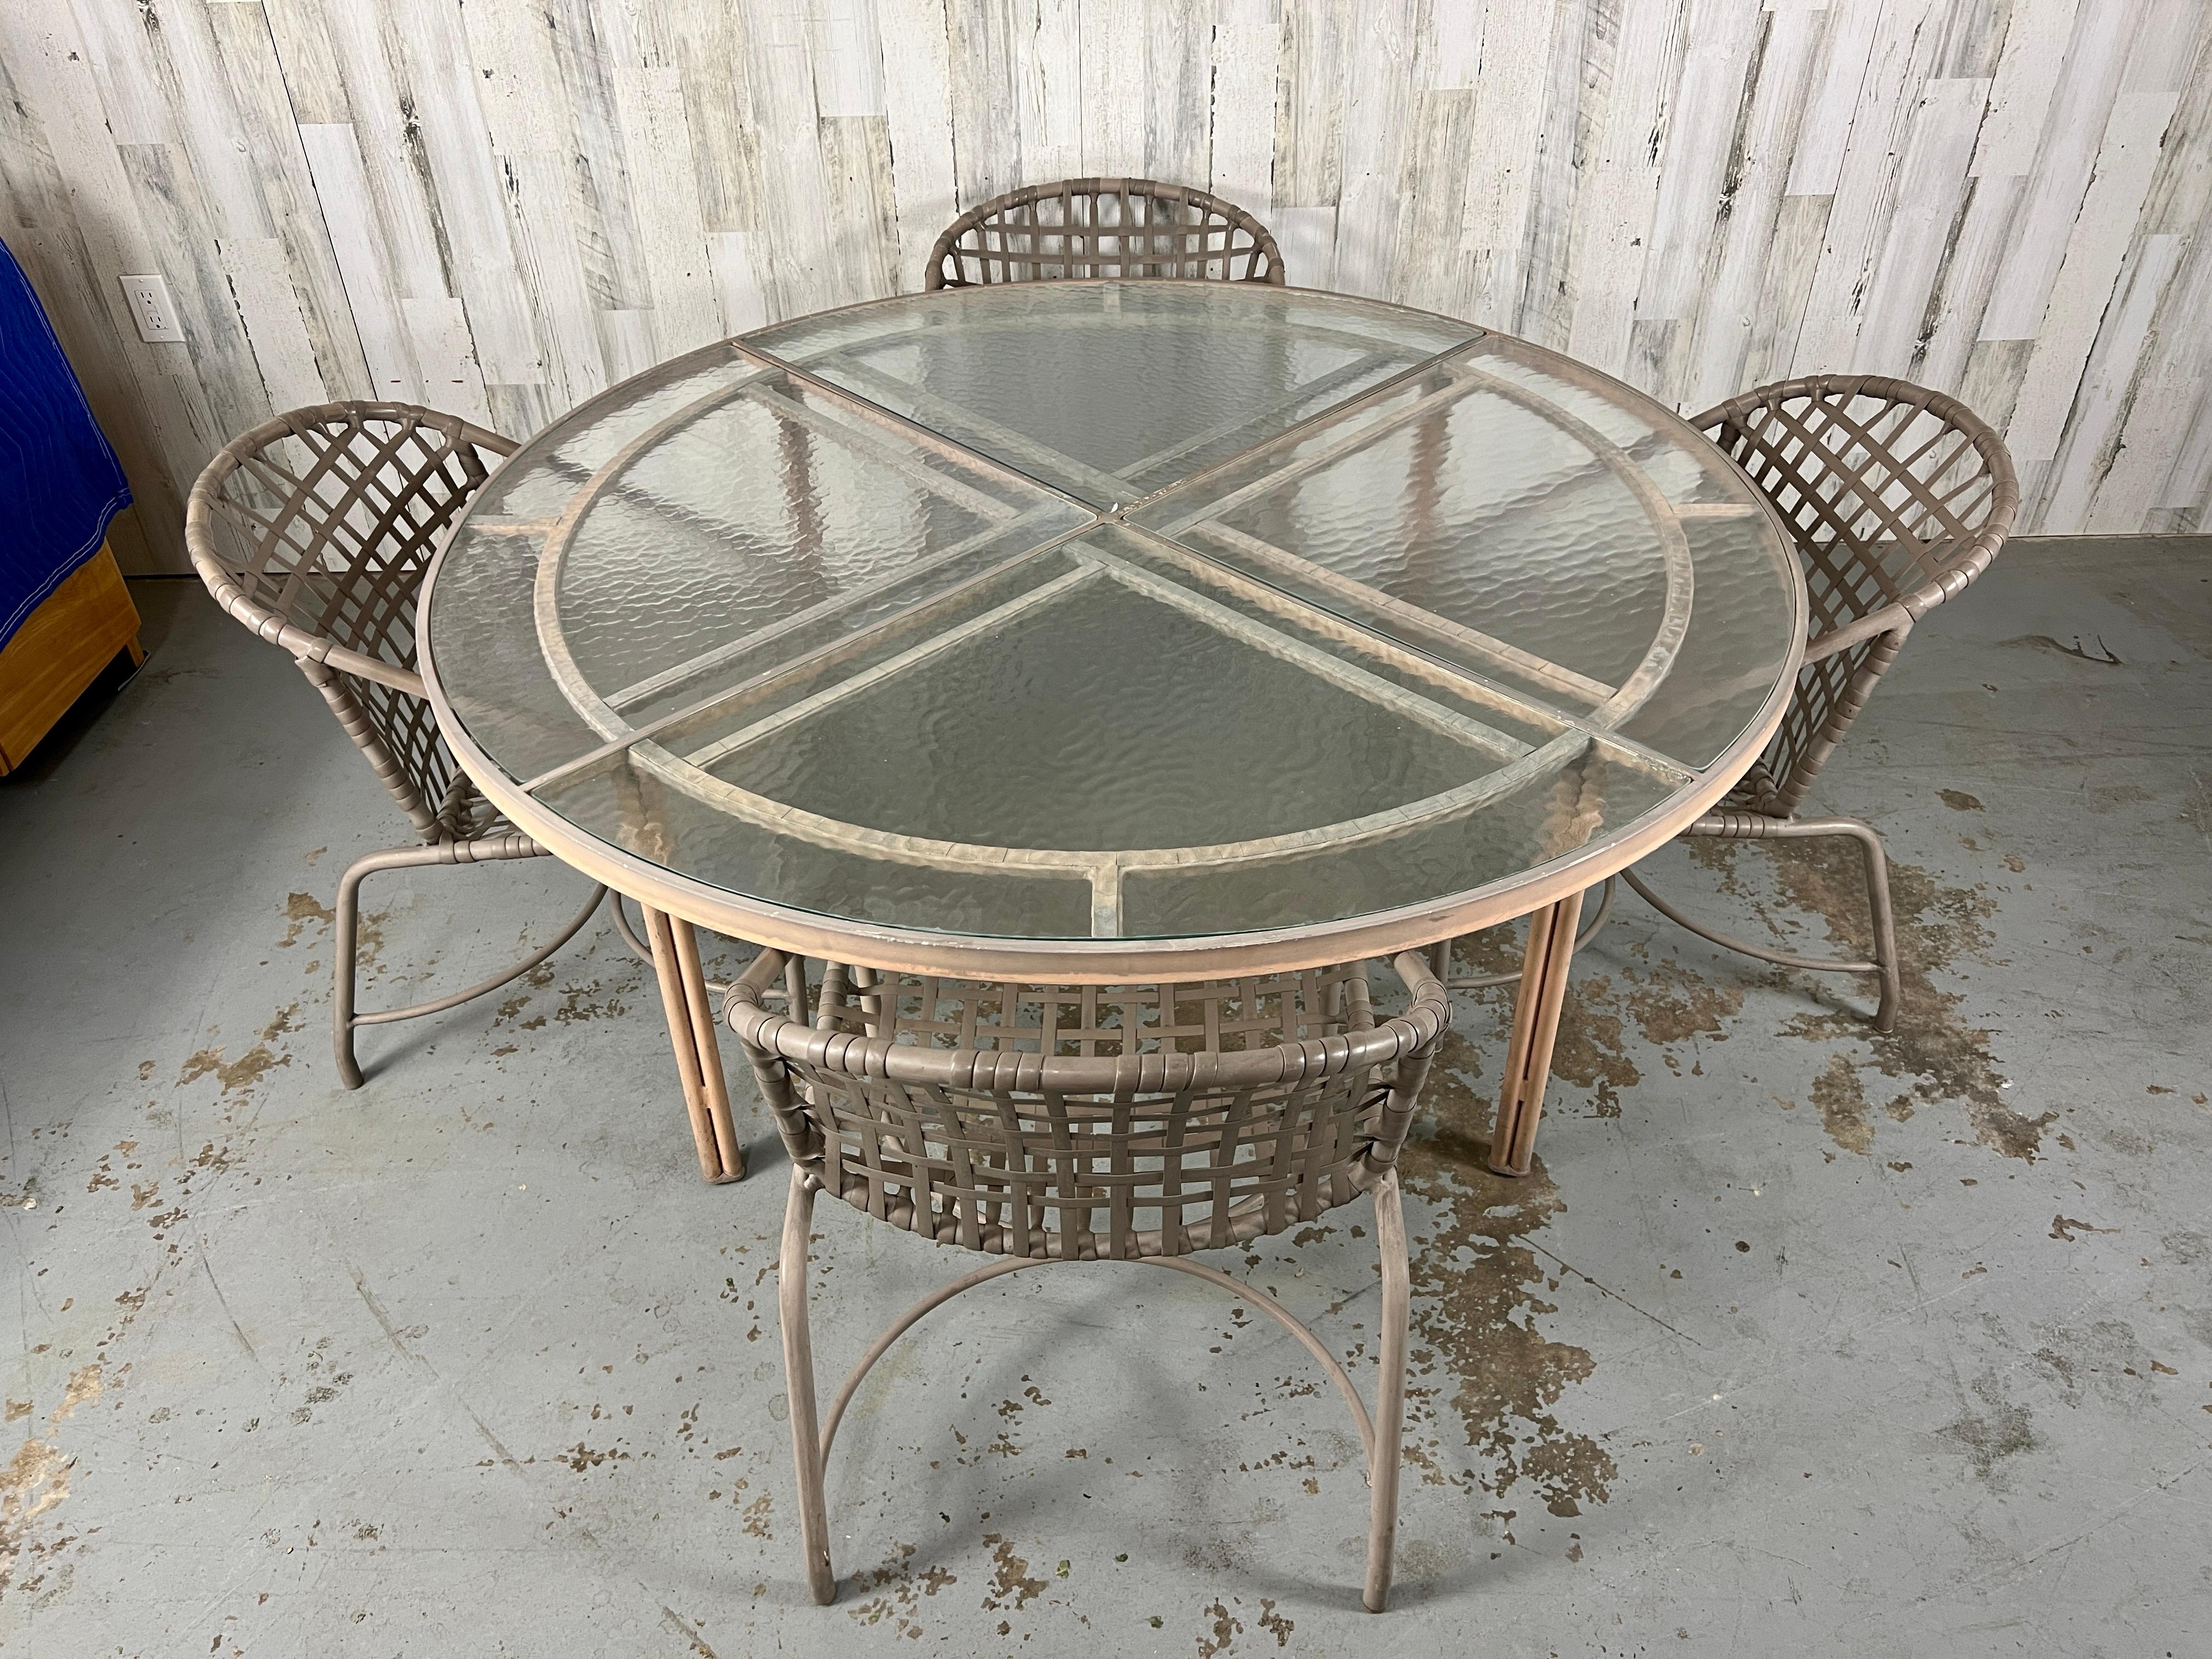 Tadao Inouye for Brown Jordan Kantan Patio Set. The glass tabletop can be disassembled into four quadrants, and the chair straps are in excellent condition. While the entire set is functional, you might consider having it re-powder coated for a